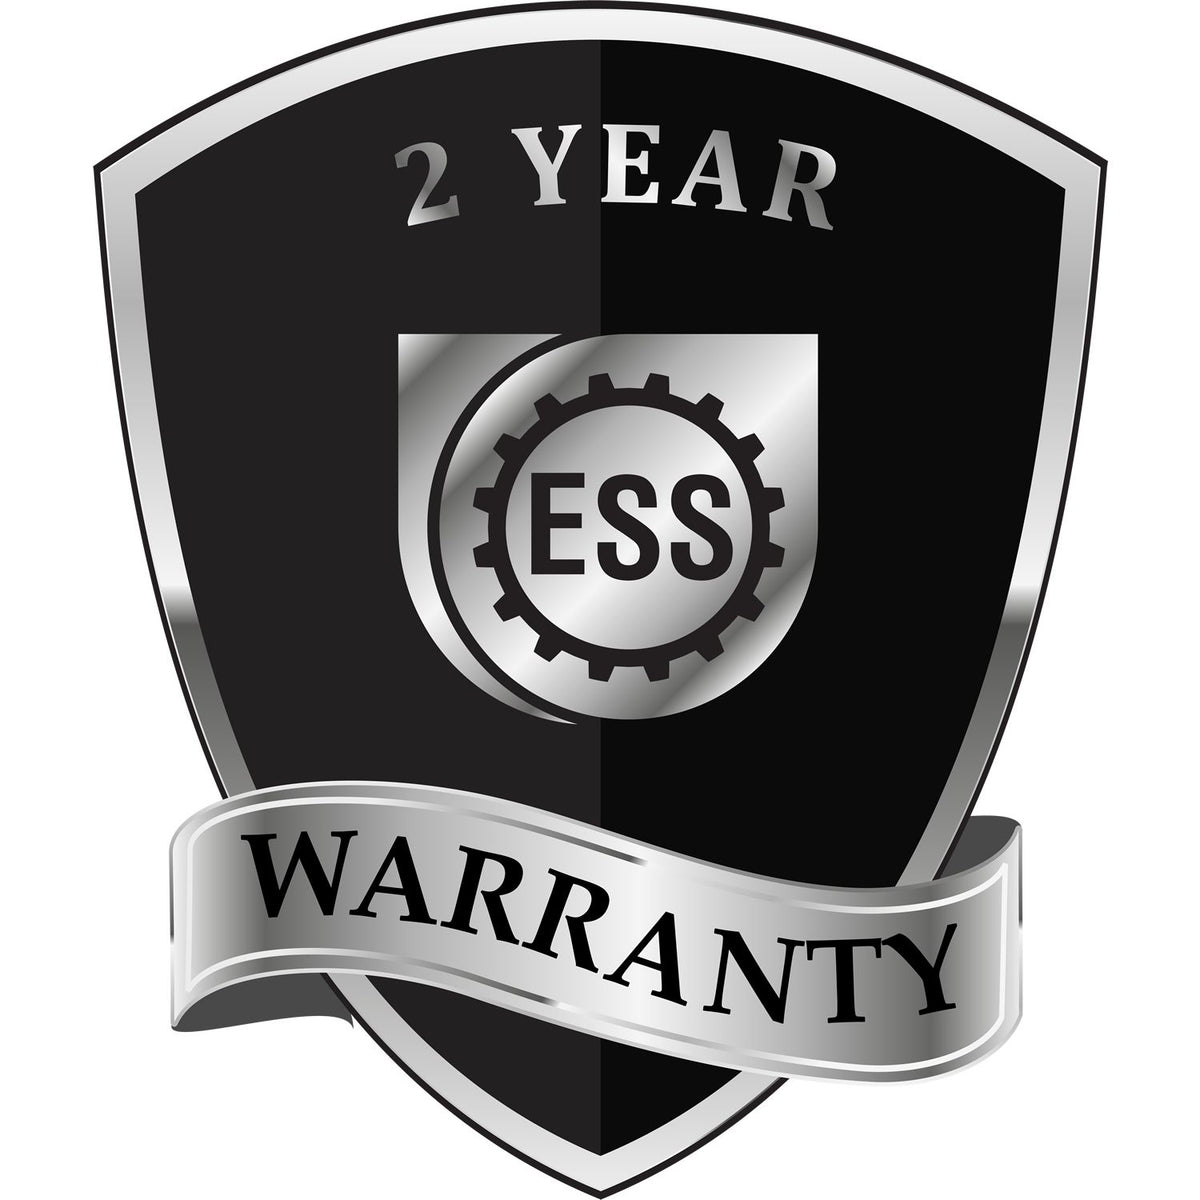 A black and silver badge or emblem showing warranty information for the Gift New York Landscape Architect Seal